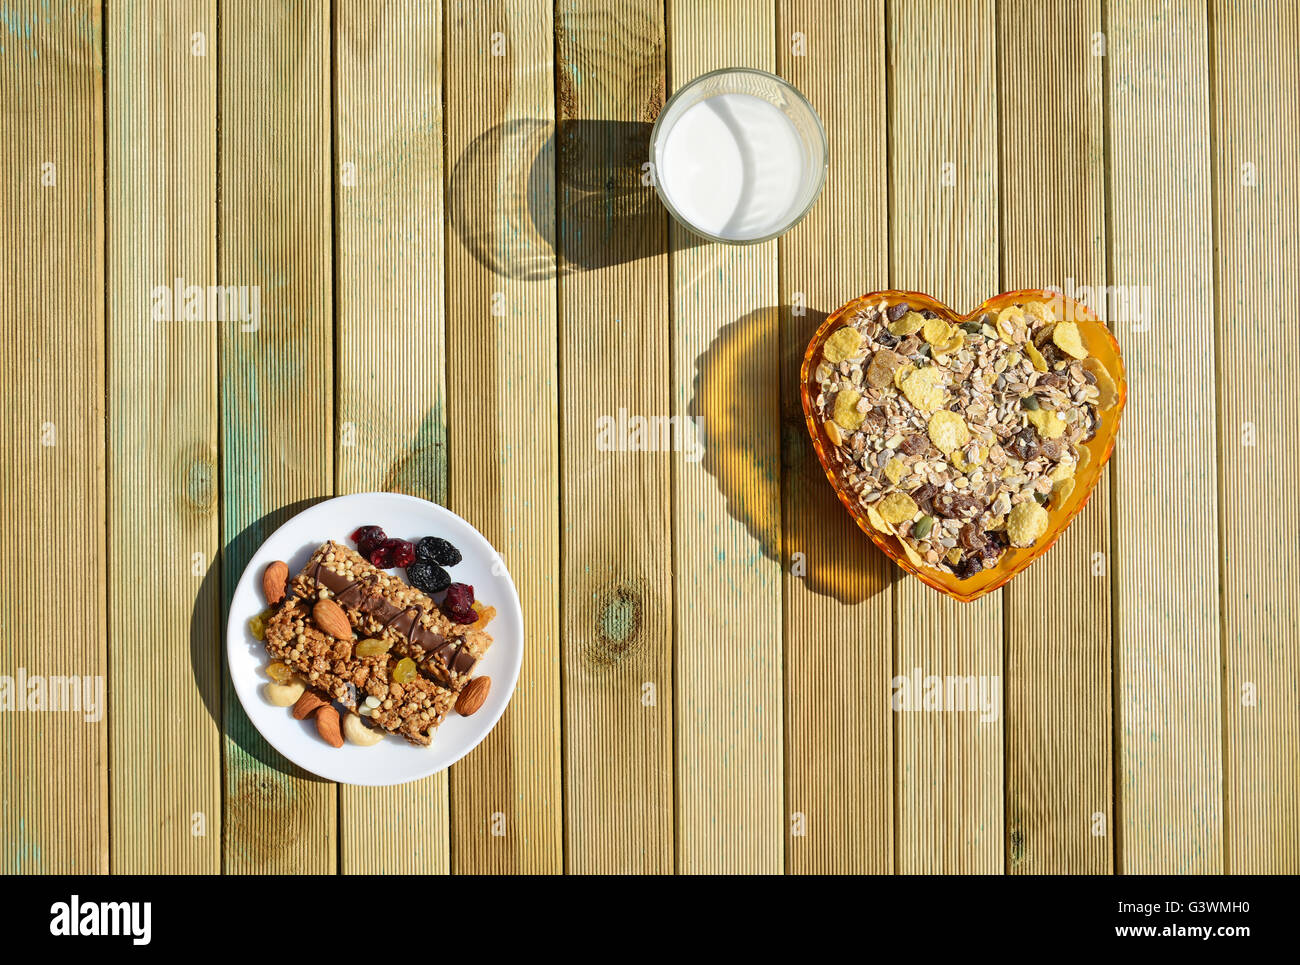 A healthy breakfast with cereal muesli, milk, nuts and berries Stock Photo